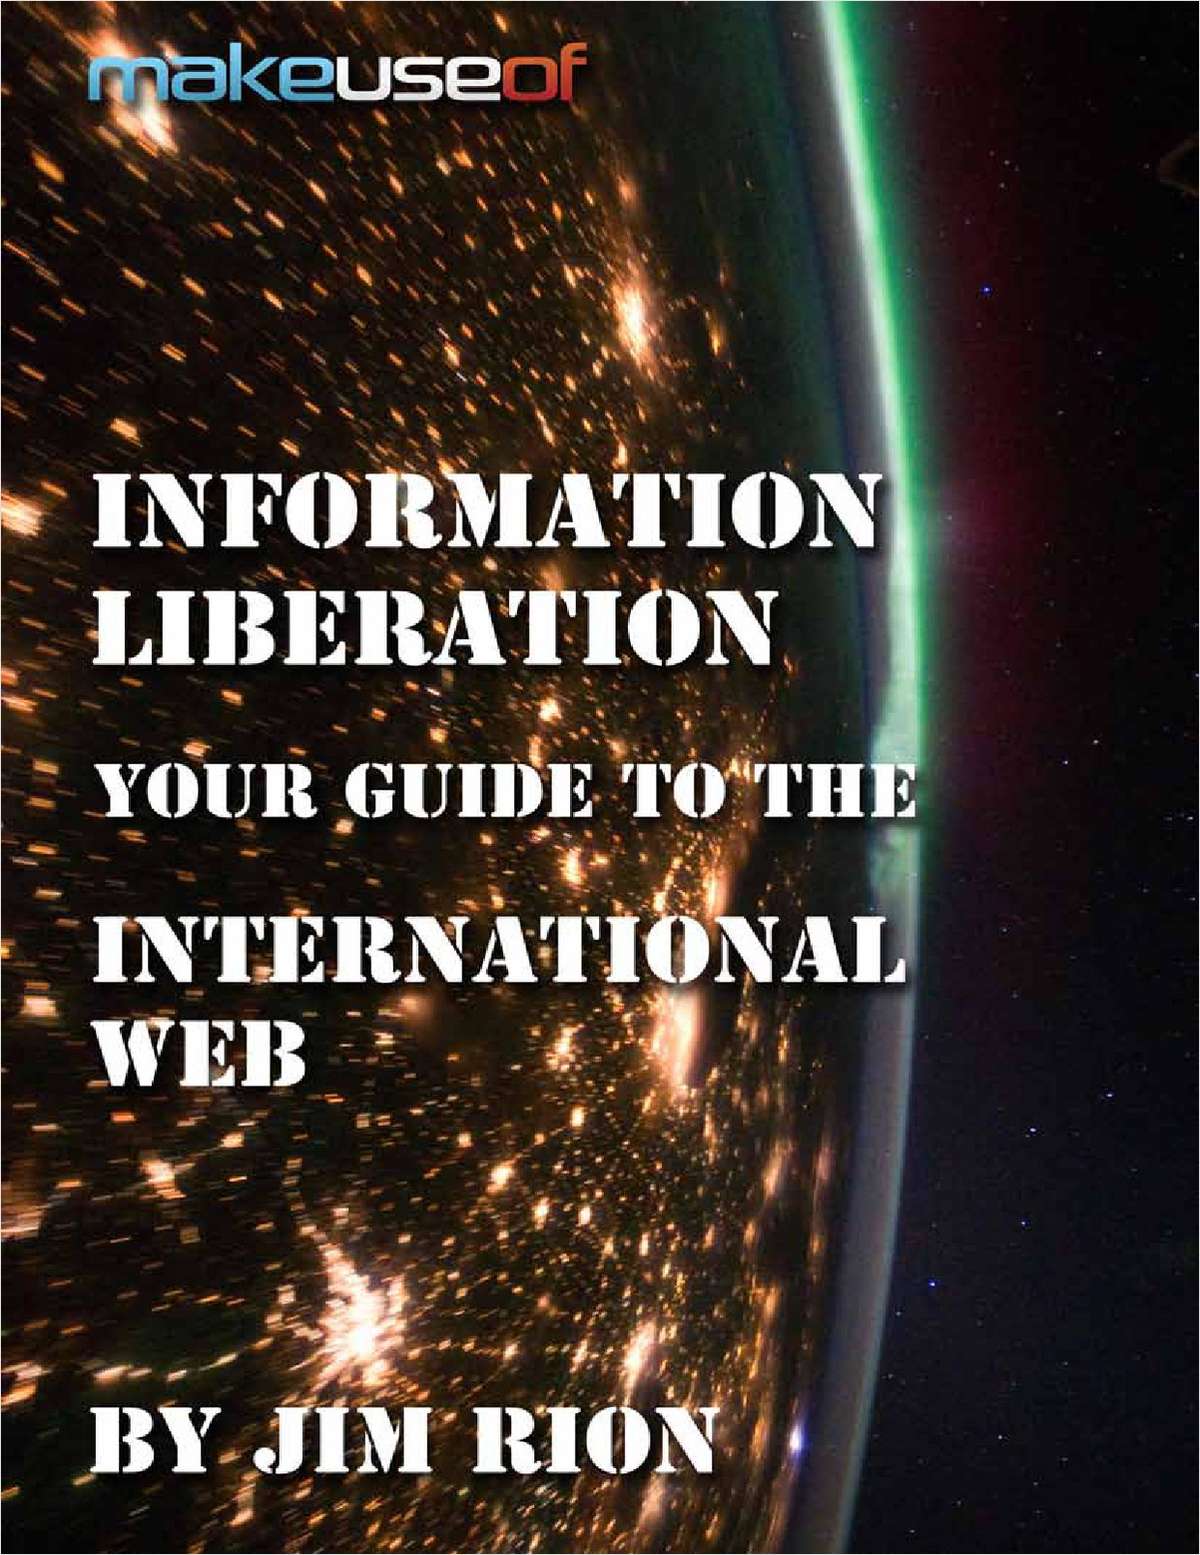 Your Guide to the International Web